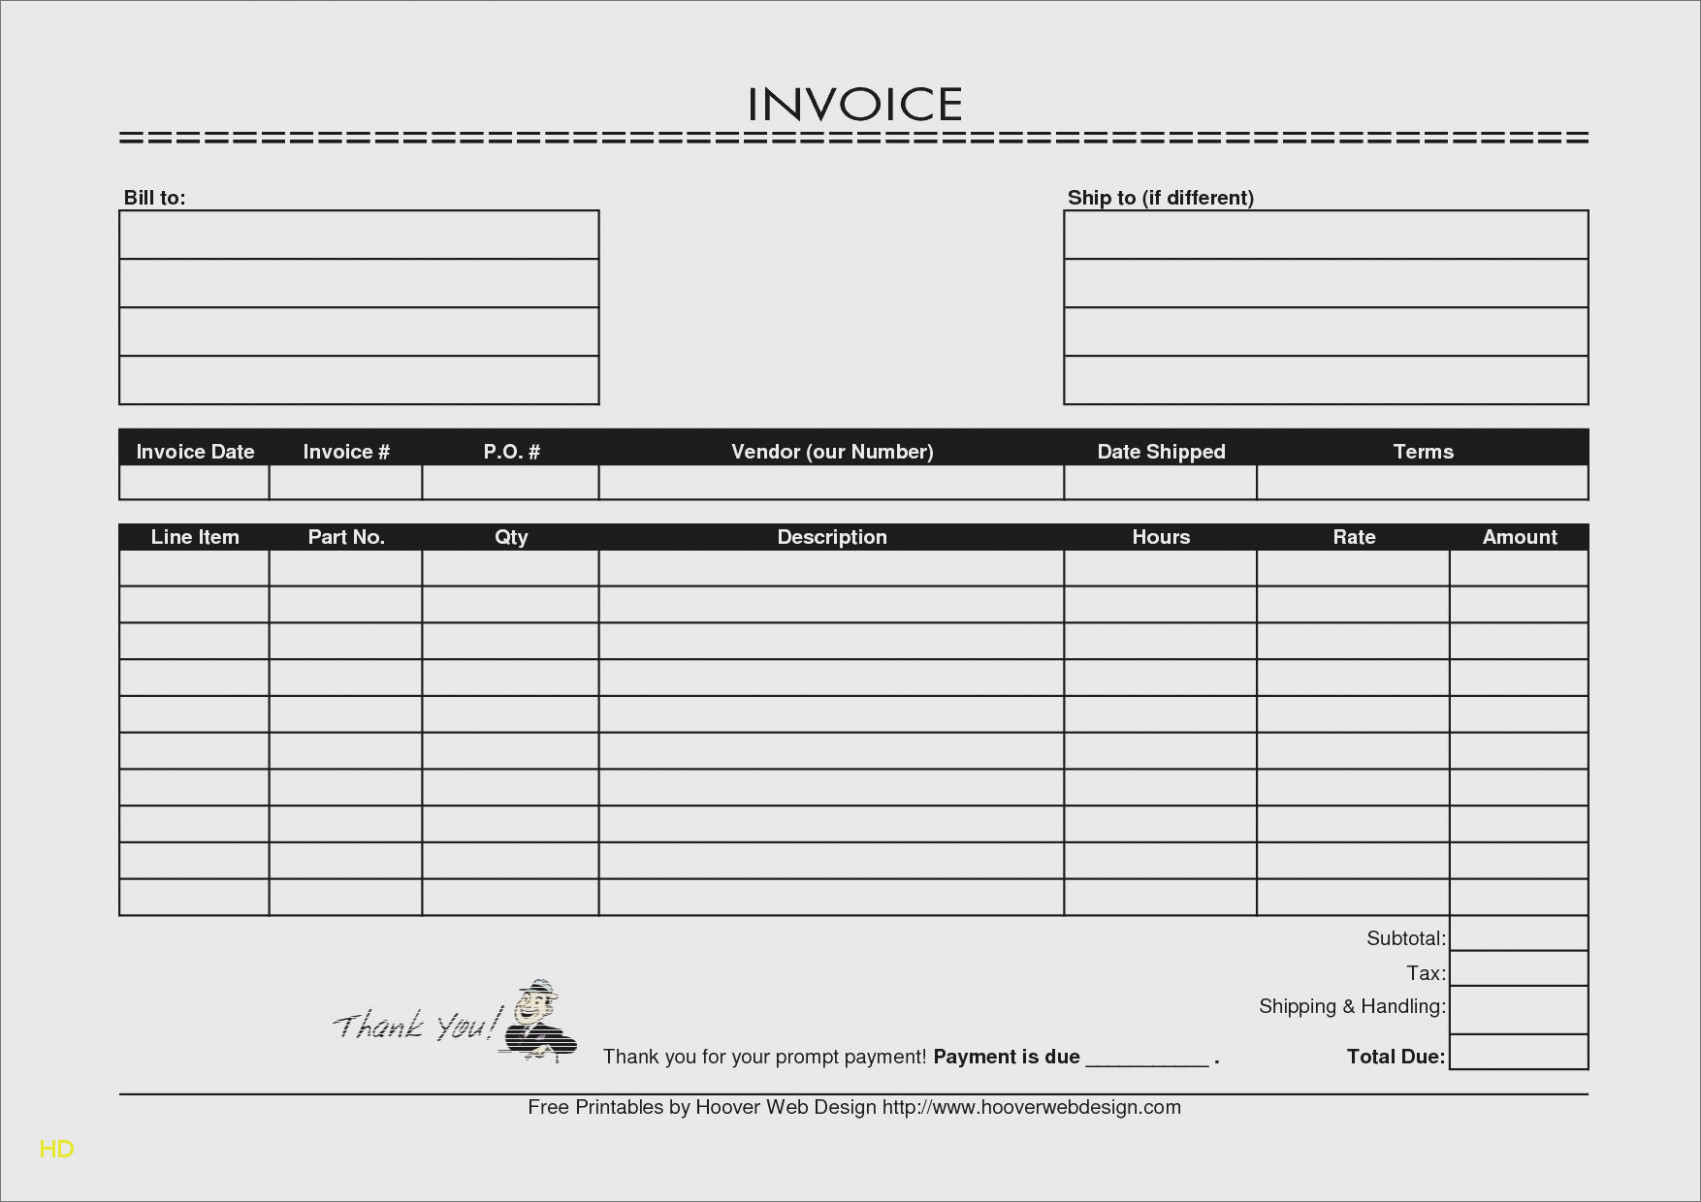 Reasons Why Free Printable | Invoice And Resume Template Ideas - Free Printable Invoices